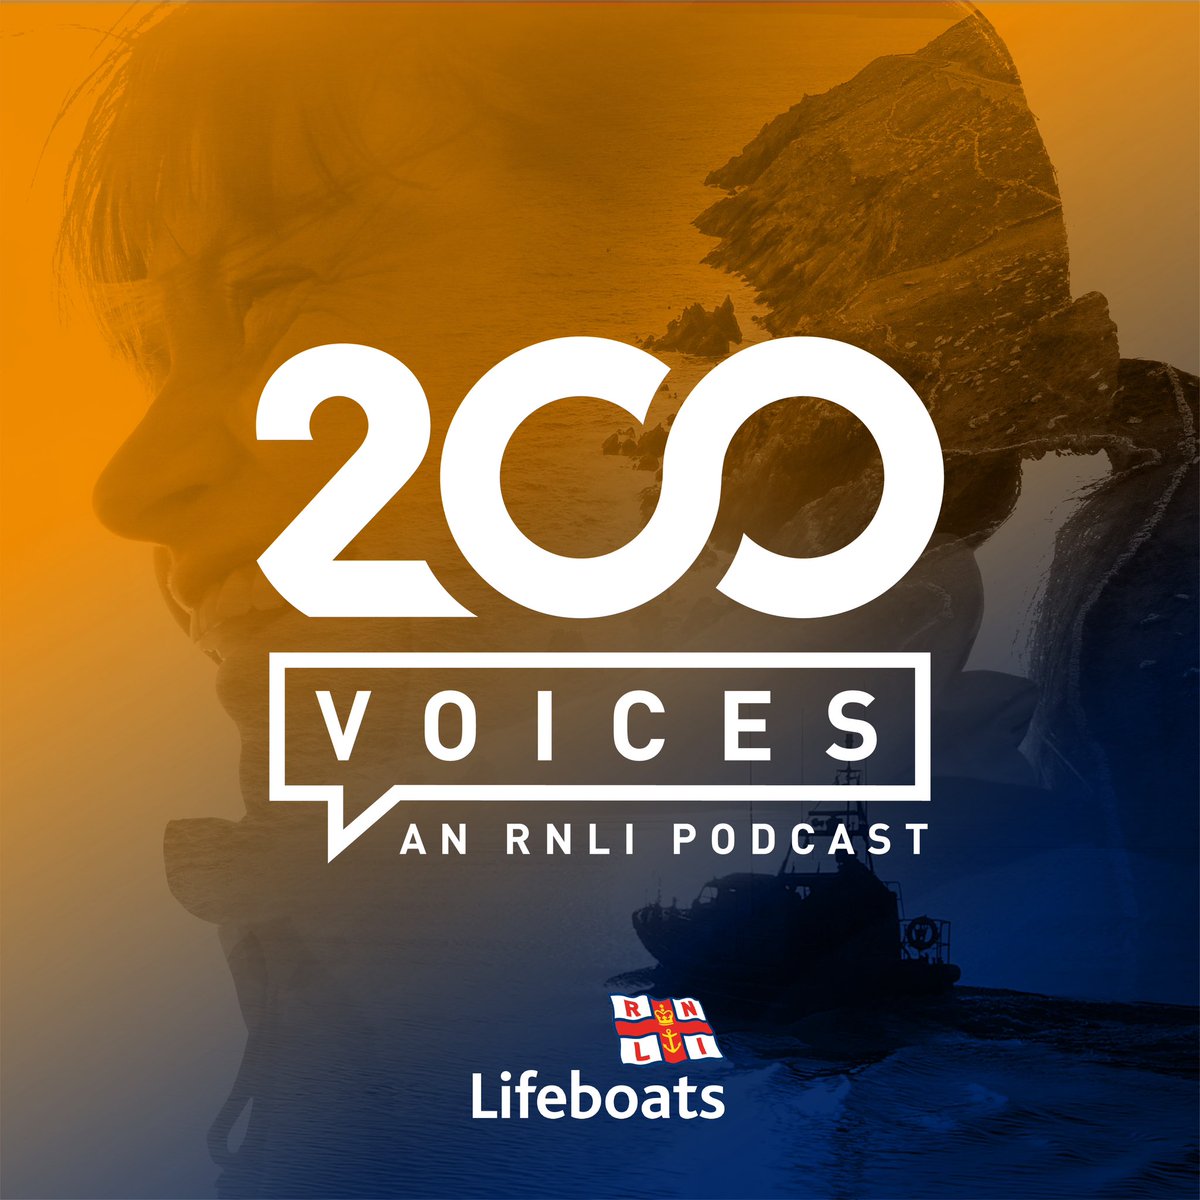 In the run-up to the #RNLI’s 200th birthday on 4.3.2024, we’re releasing one podcast episode every day for 200 days. Today you can hear from our much loved supporter and friend, the late Mary Taylor rnli.org/magazine/magaz… #RNLI #200voices